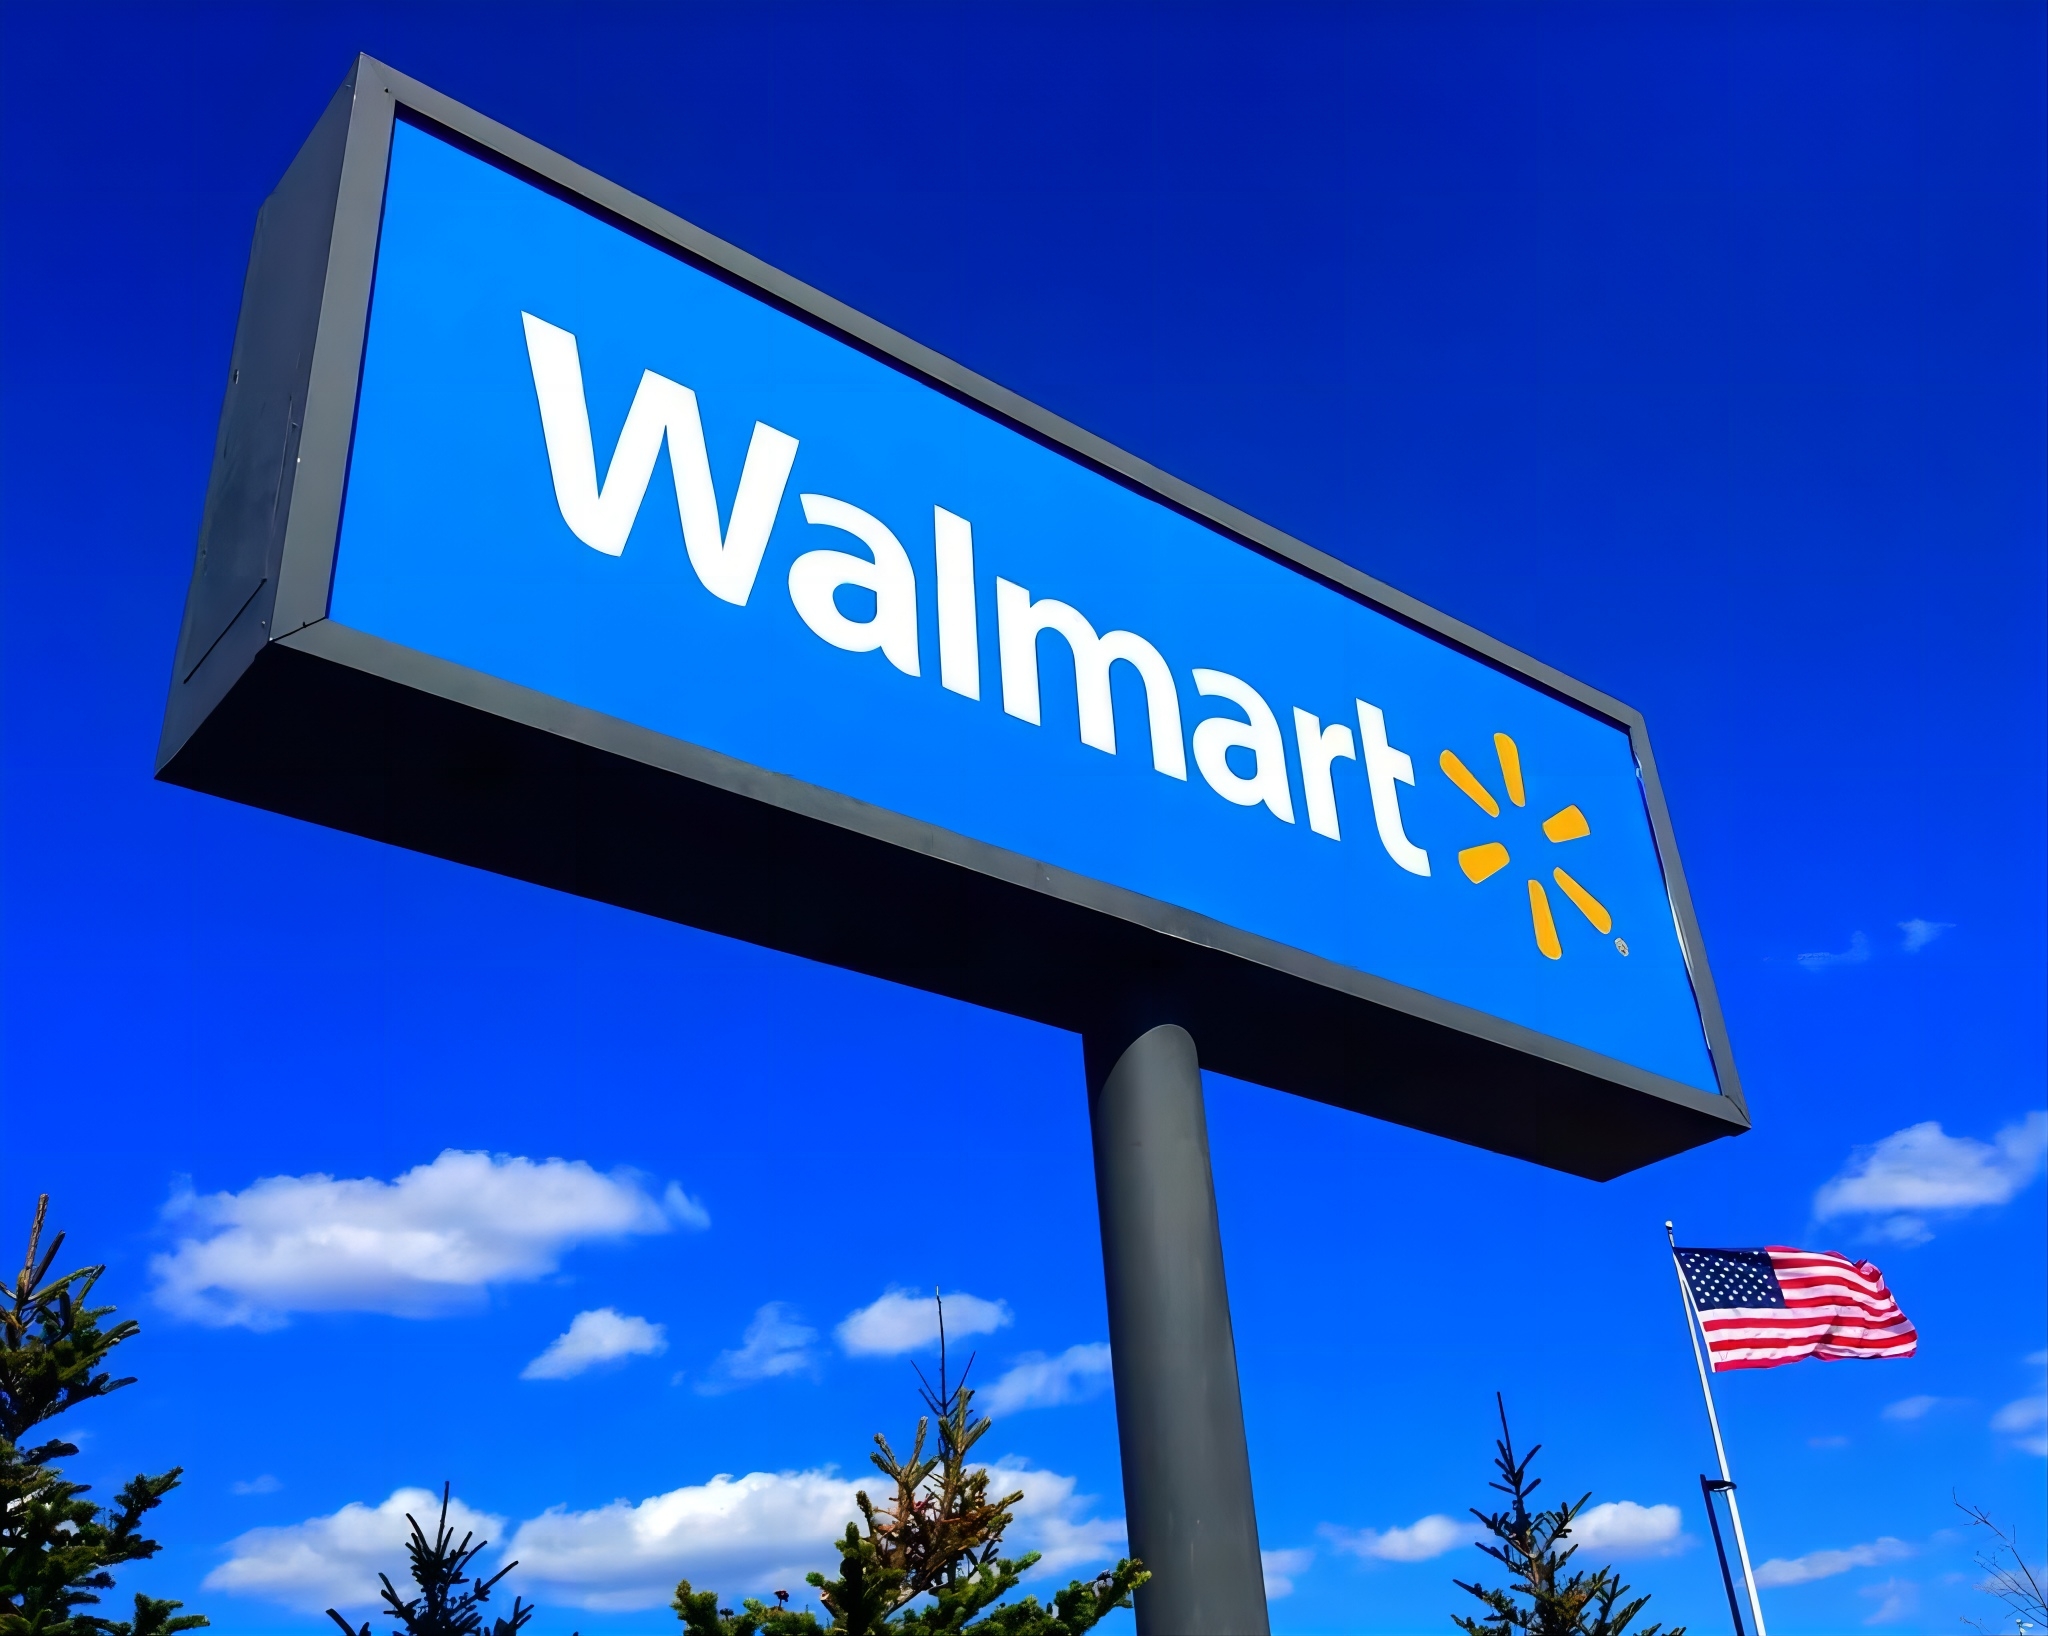 Wal-Mart plans to realize store automation services, RFID technology plays a pivotal role